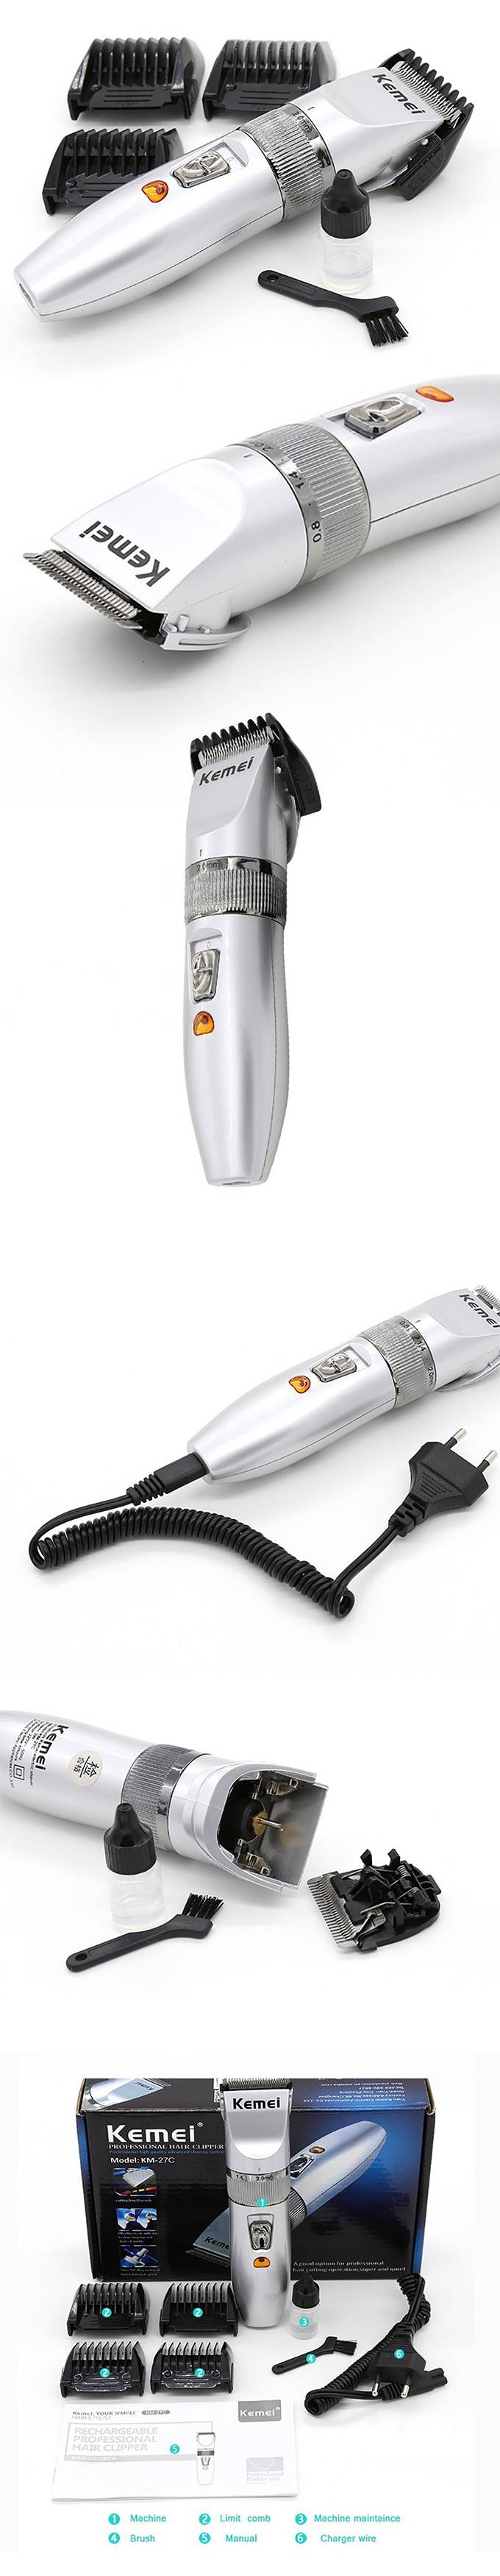 Kemei Rechargeable Trimmer for Men Rs. 1,099/- instead of Rs. 1,500 - [27% off]